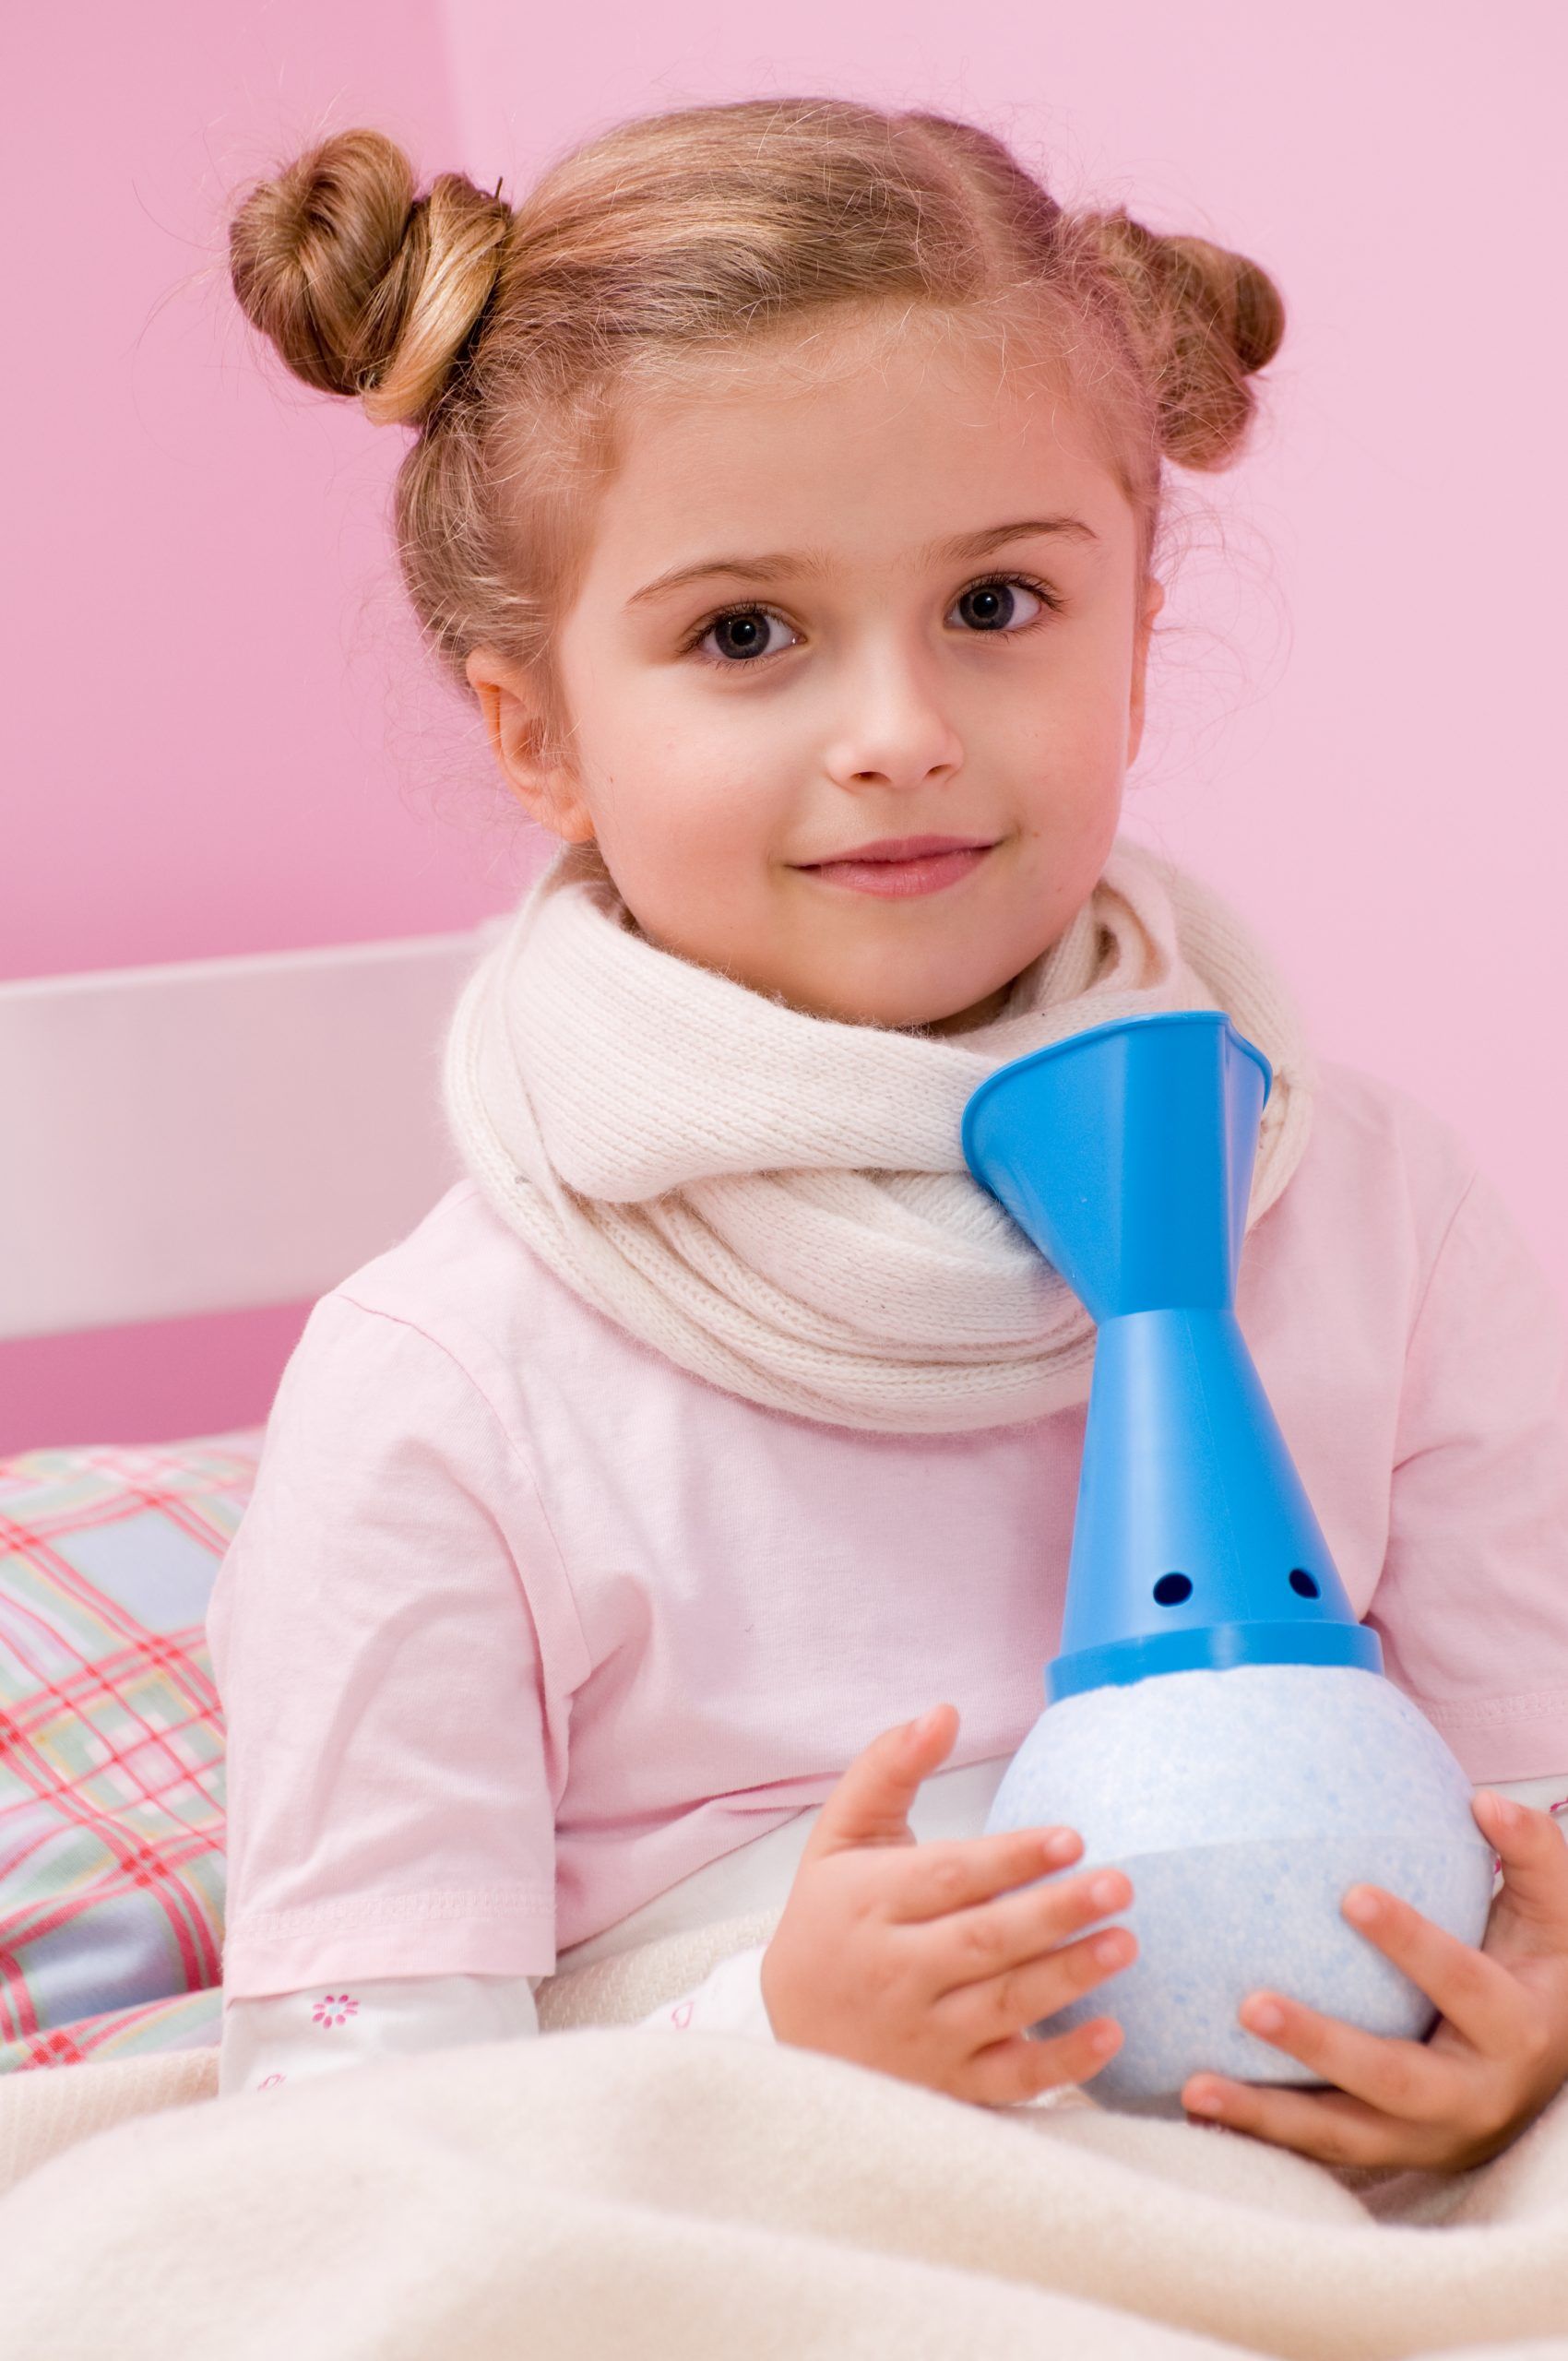 A little girl in a pink bedroom is holding a blue nebulizer to treat asthma.